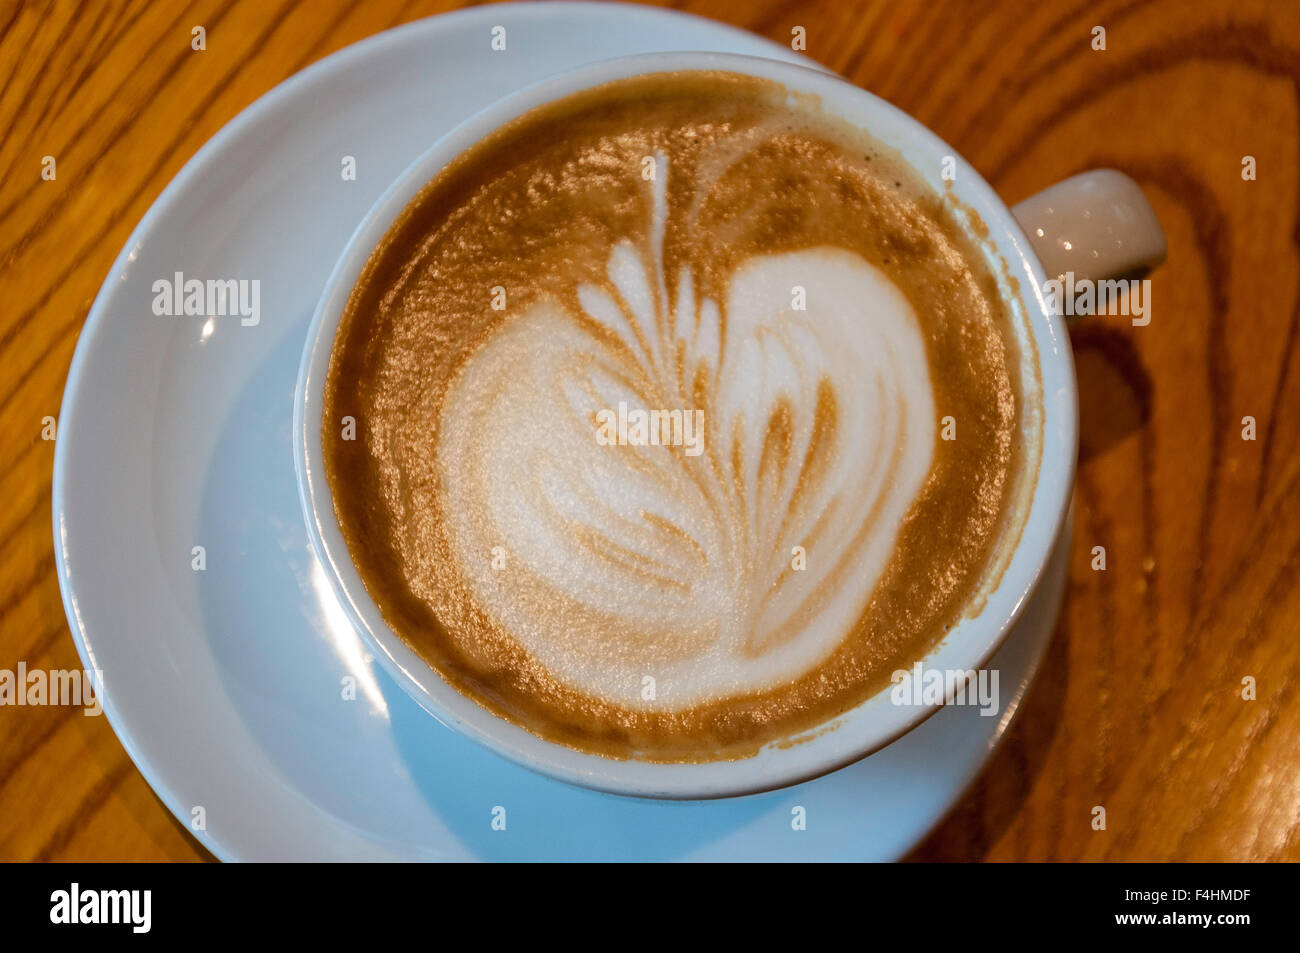 Flat white coffee, Costa Coffee Shop, The Mall Shopping Centre, Luton, Bedfordshire, England, United Kingdom Stock Photo